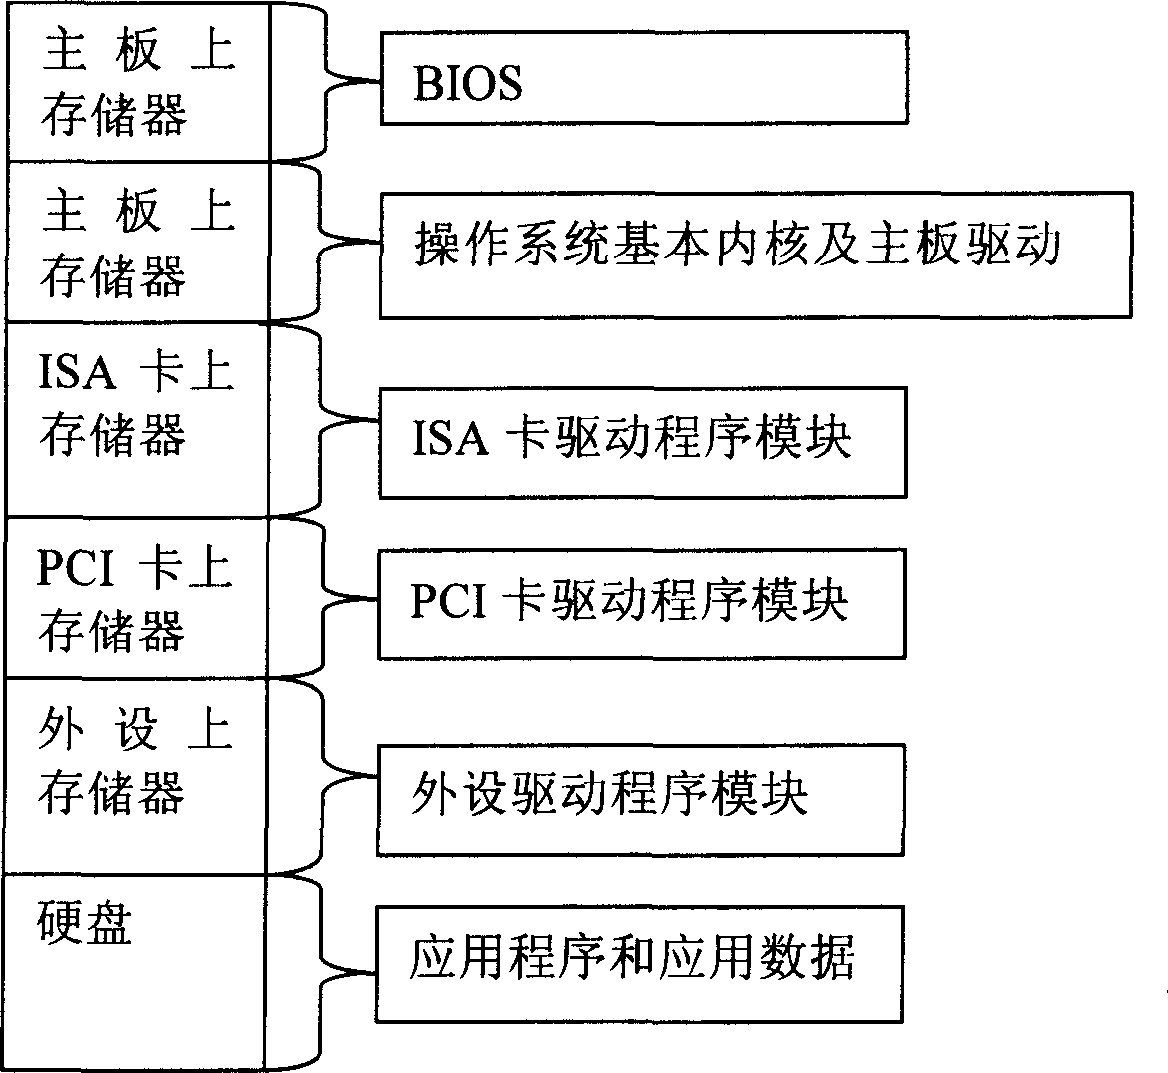 High-reliable personal computer and operating system thereof